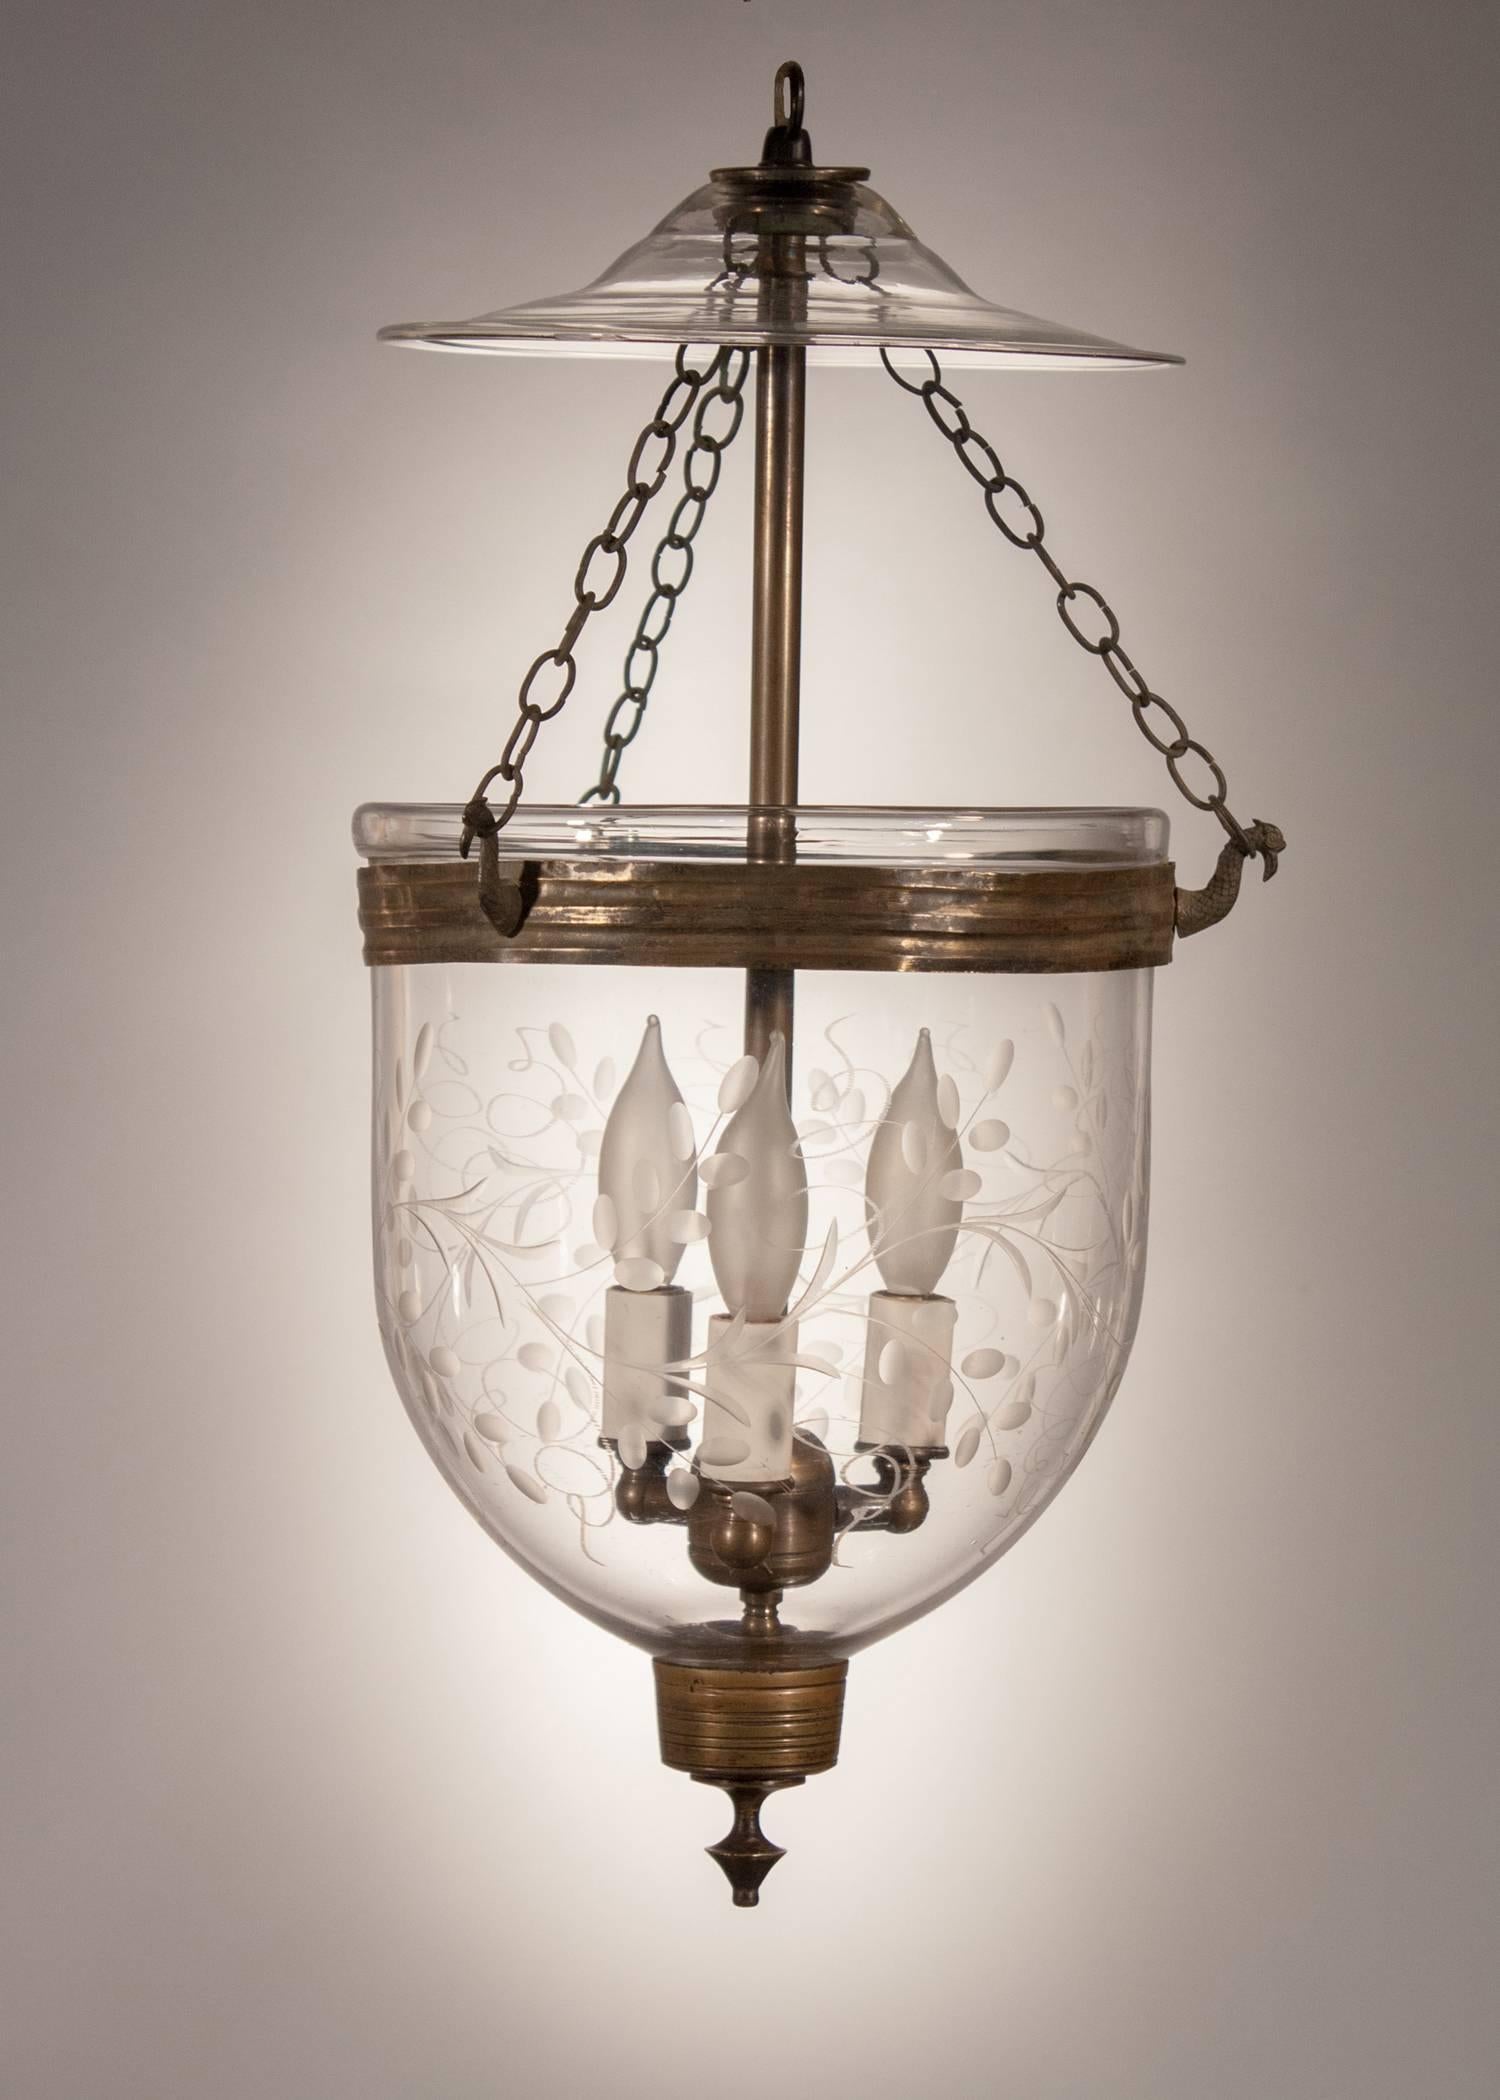 An English bell jar lantern, circa 1860, with a tasteful vine etching that complements this diminutive hall lantern beautifully. The quality of the hand blown glass is excellent and all of the pendant's brass details including its band, finial and